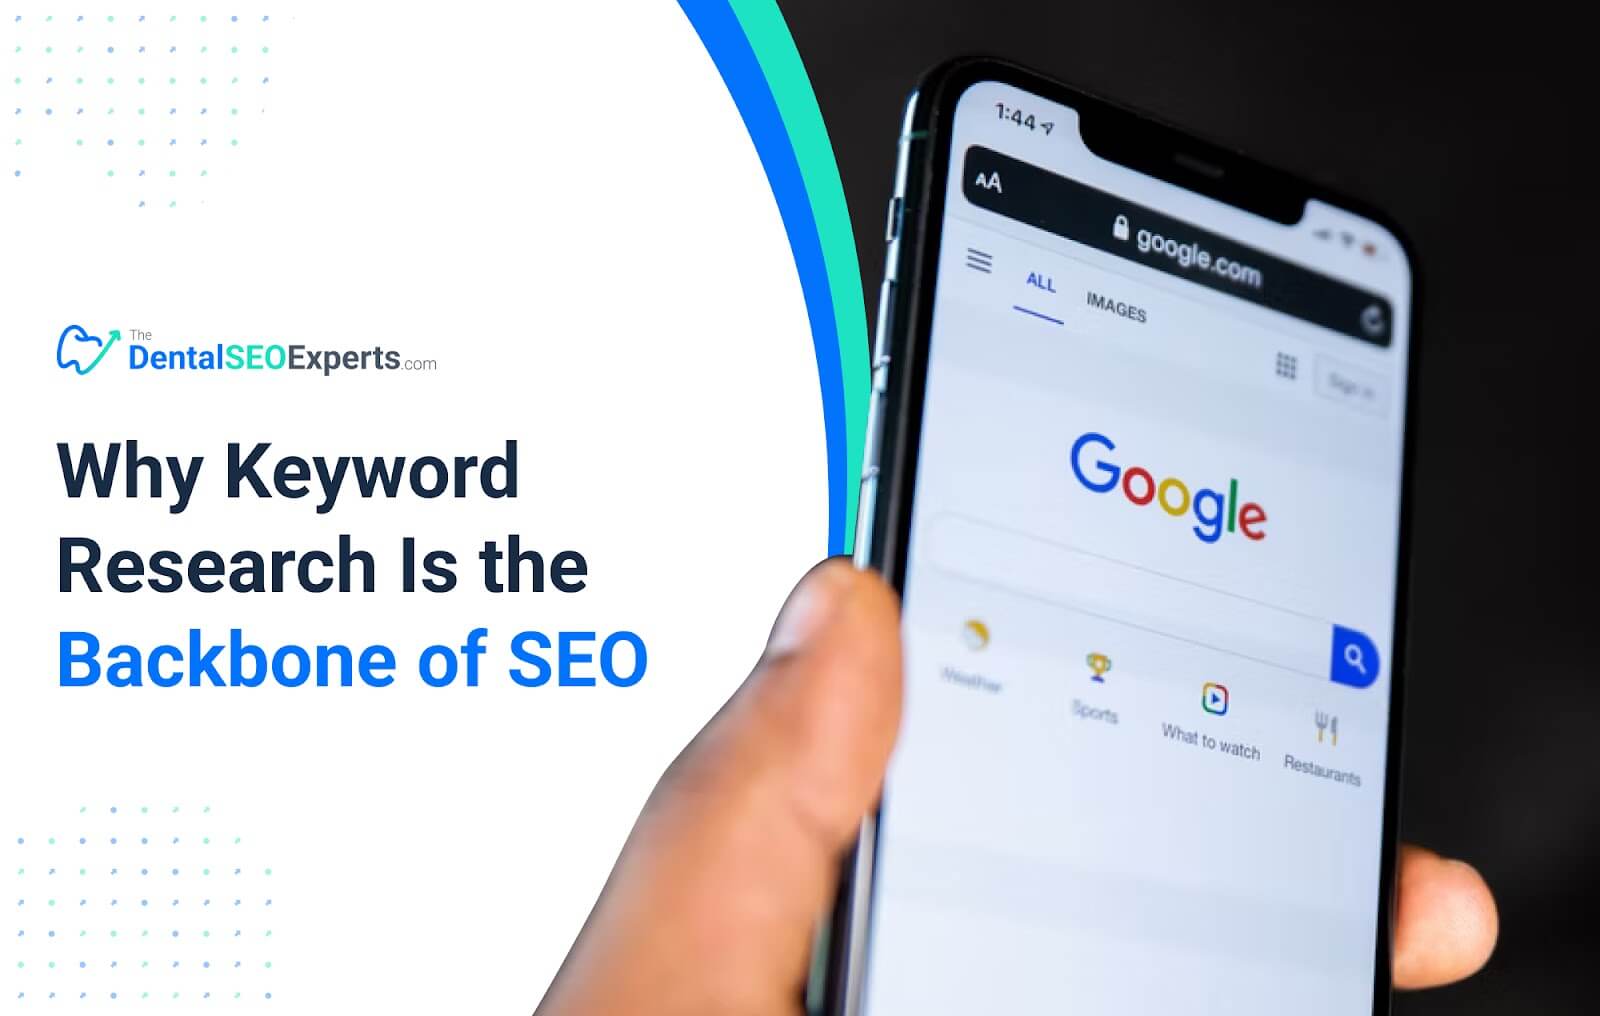 Why Keyword Research Is the Backbone of SEO